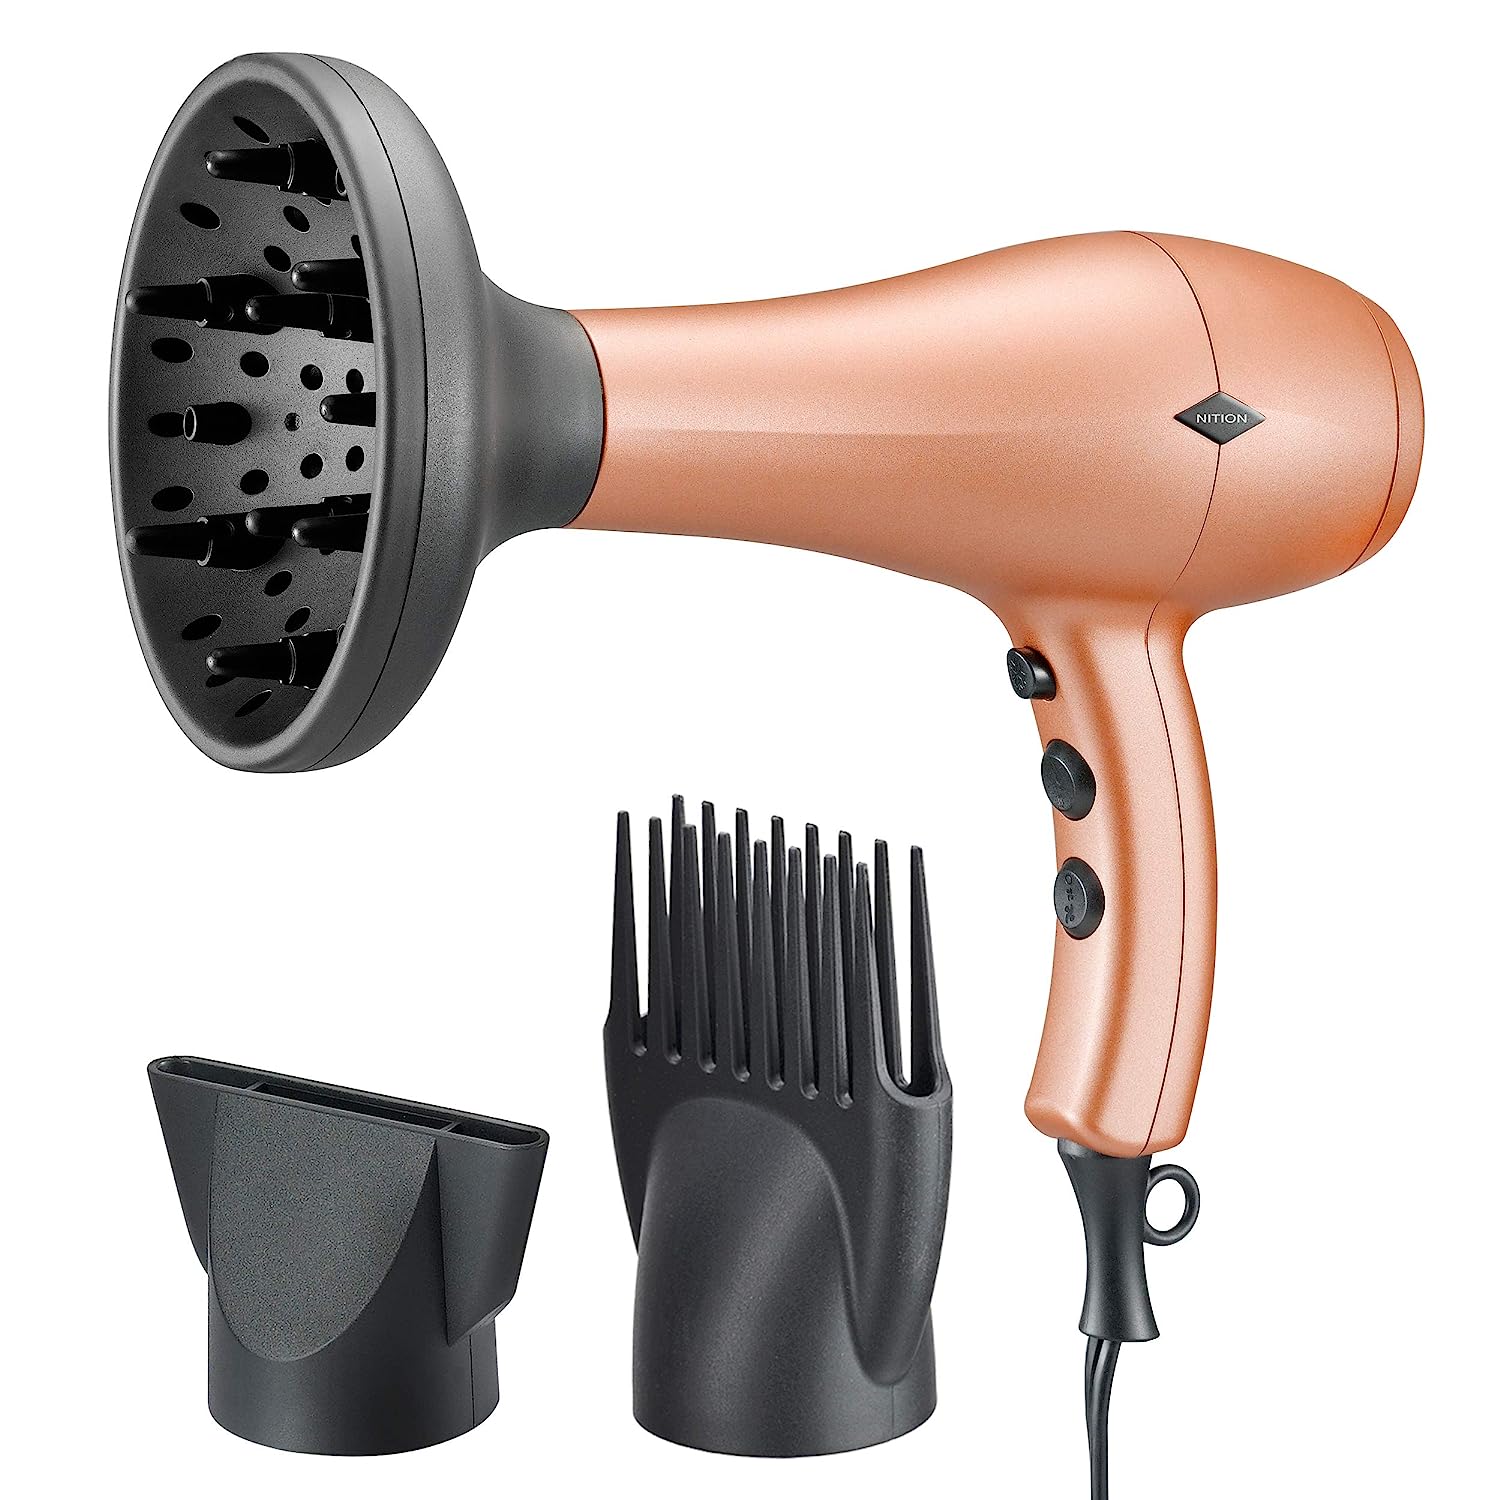 NITION Negative Ions Ceramic Hair Dryer with Diffuser [...]